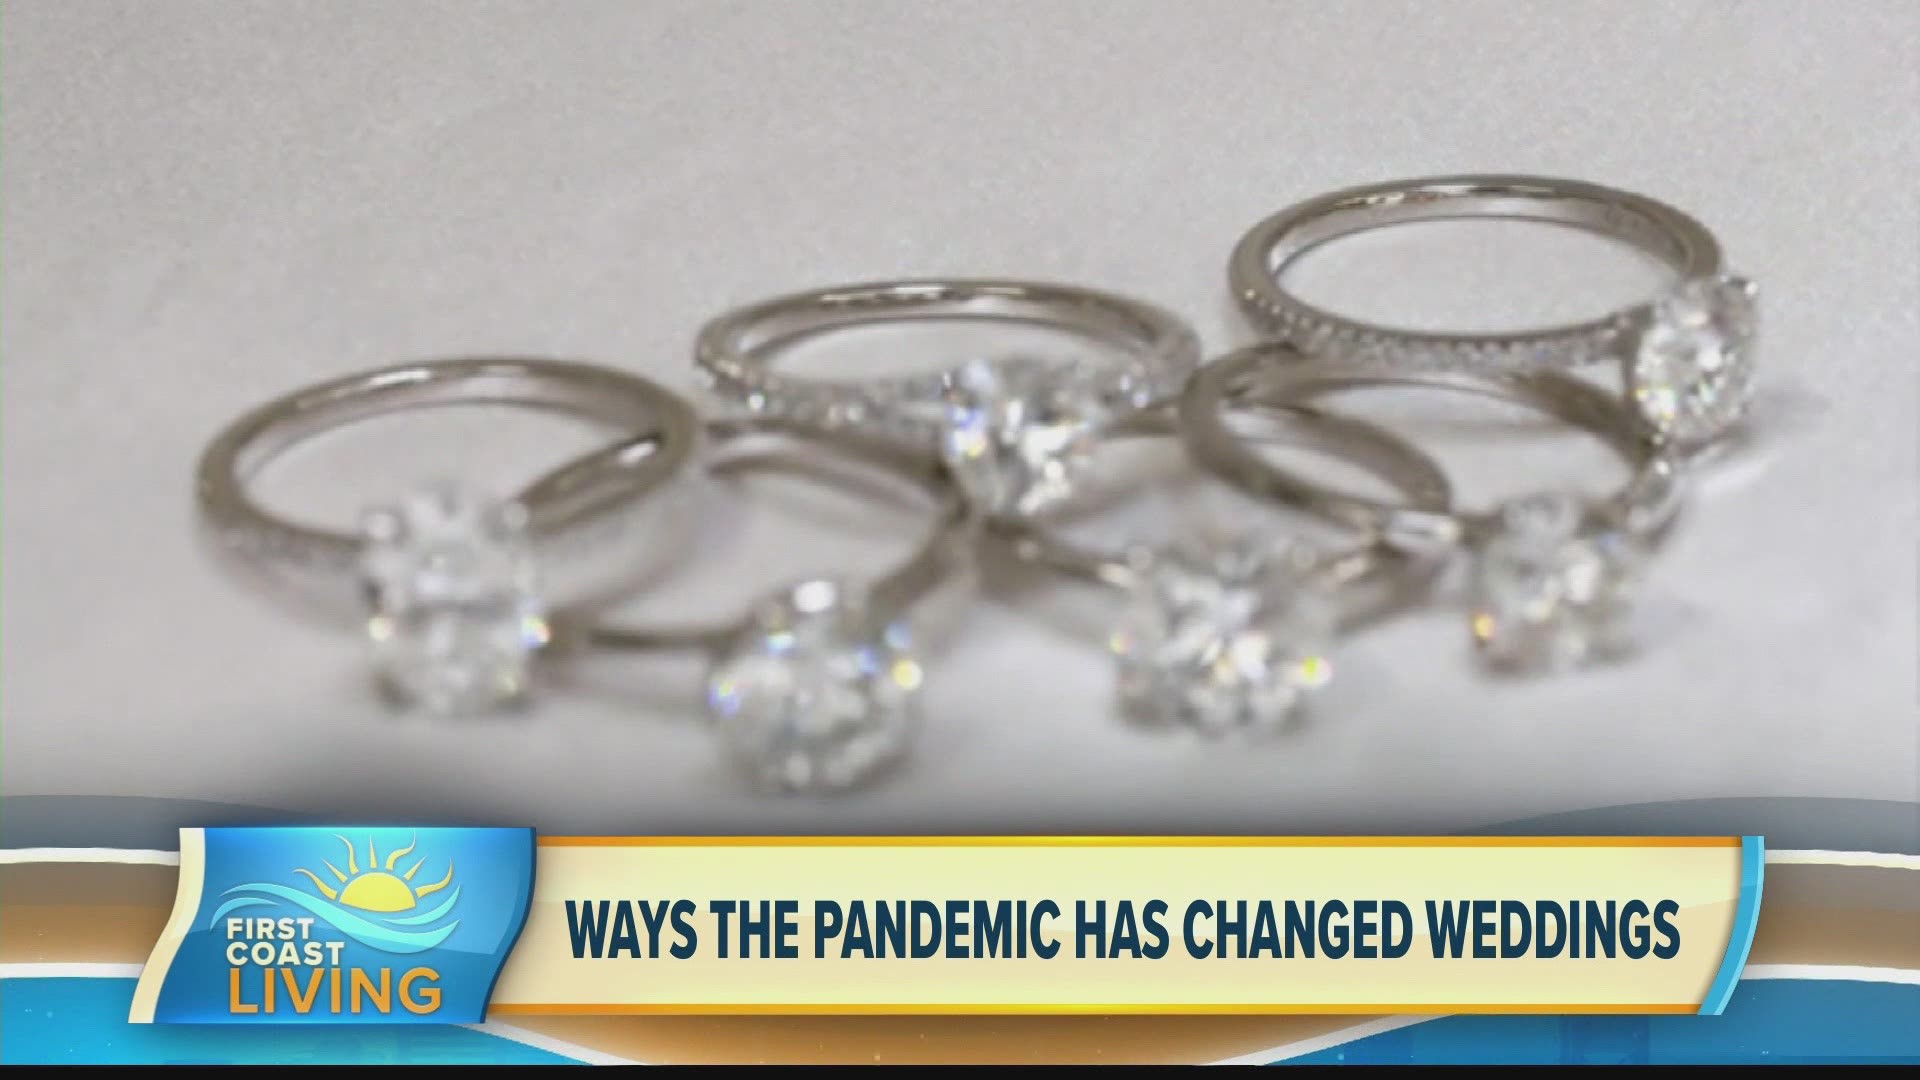 An expert discusses how the pandemic has impacted weddings as well as offers tips for those brides-to-be.